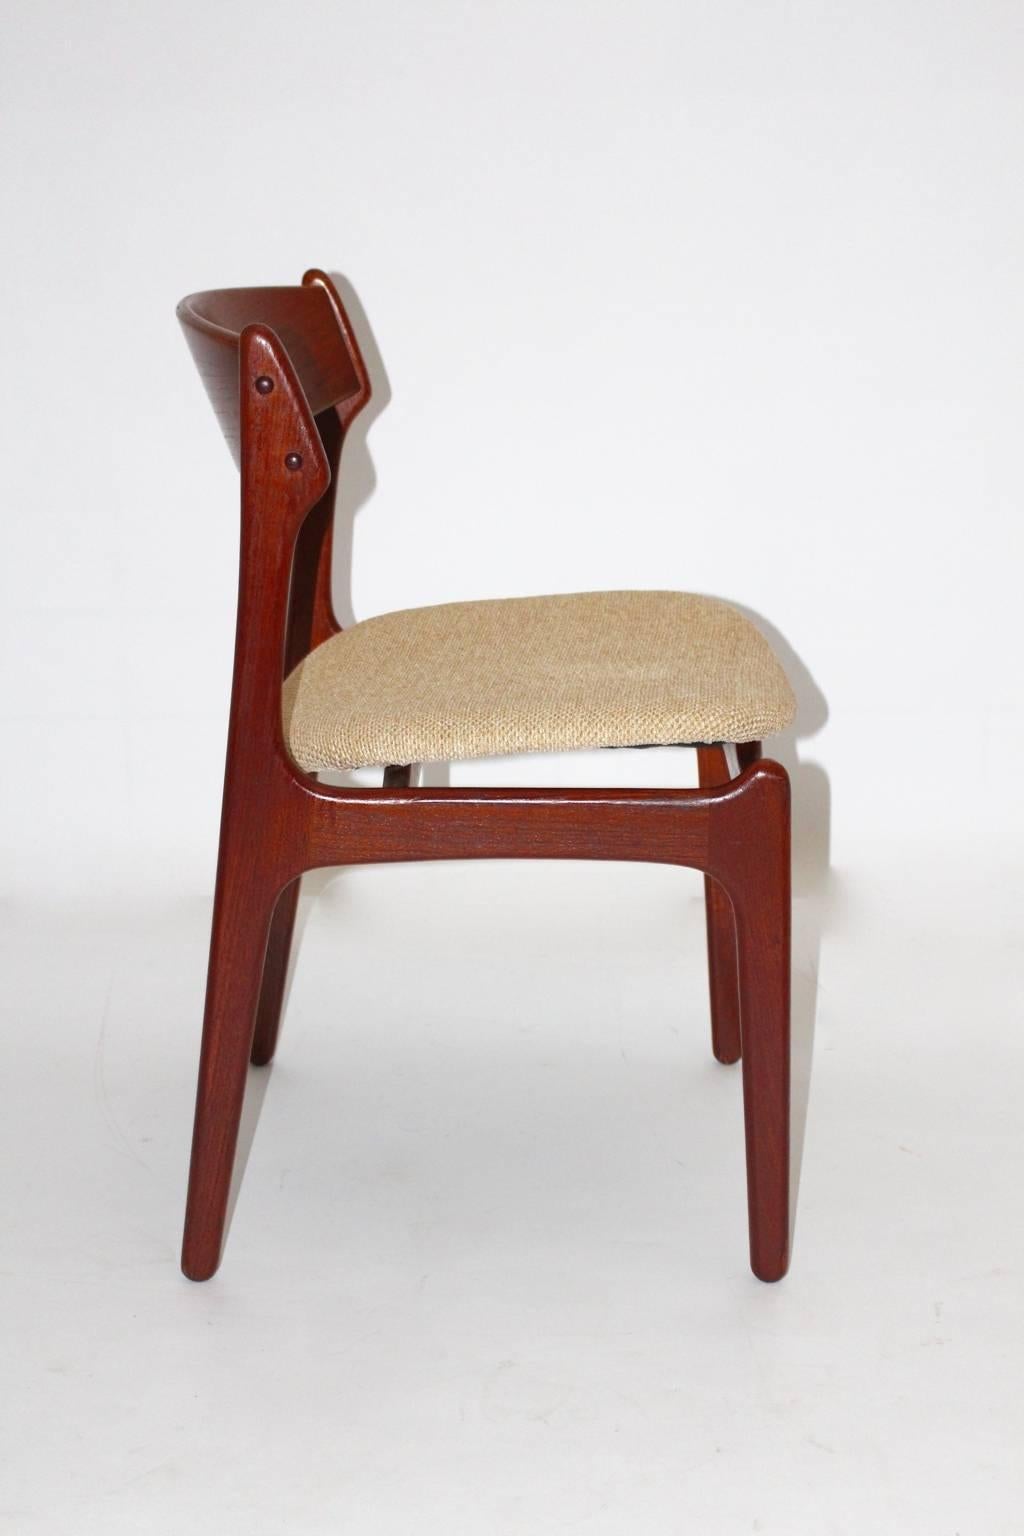 Scandinavian modern set of six vintage dining chairs designed by Erik Buck, 1967, Denmark and produced by O. D. Mobler.
While the seat frame made from solid teakwood, the seat shell made from plywood and reupholstered with cosy light brown woolen